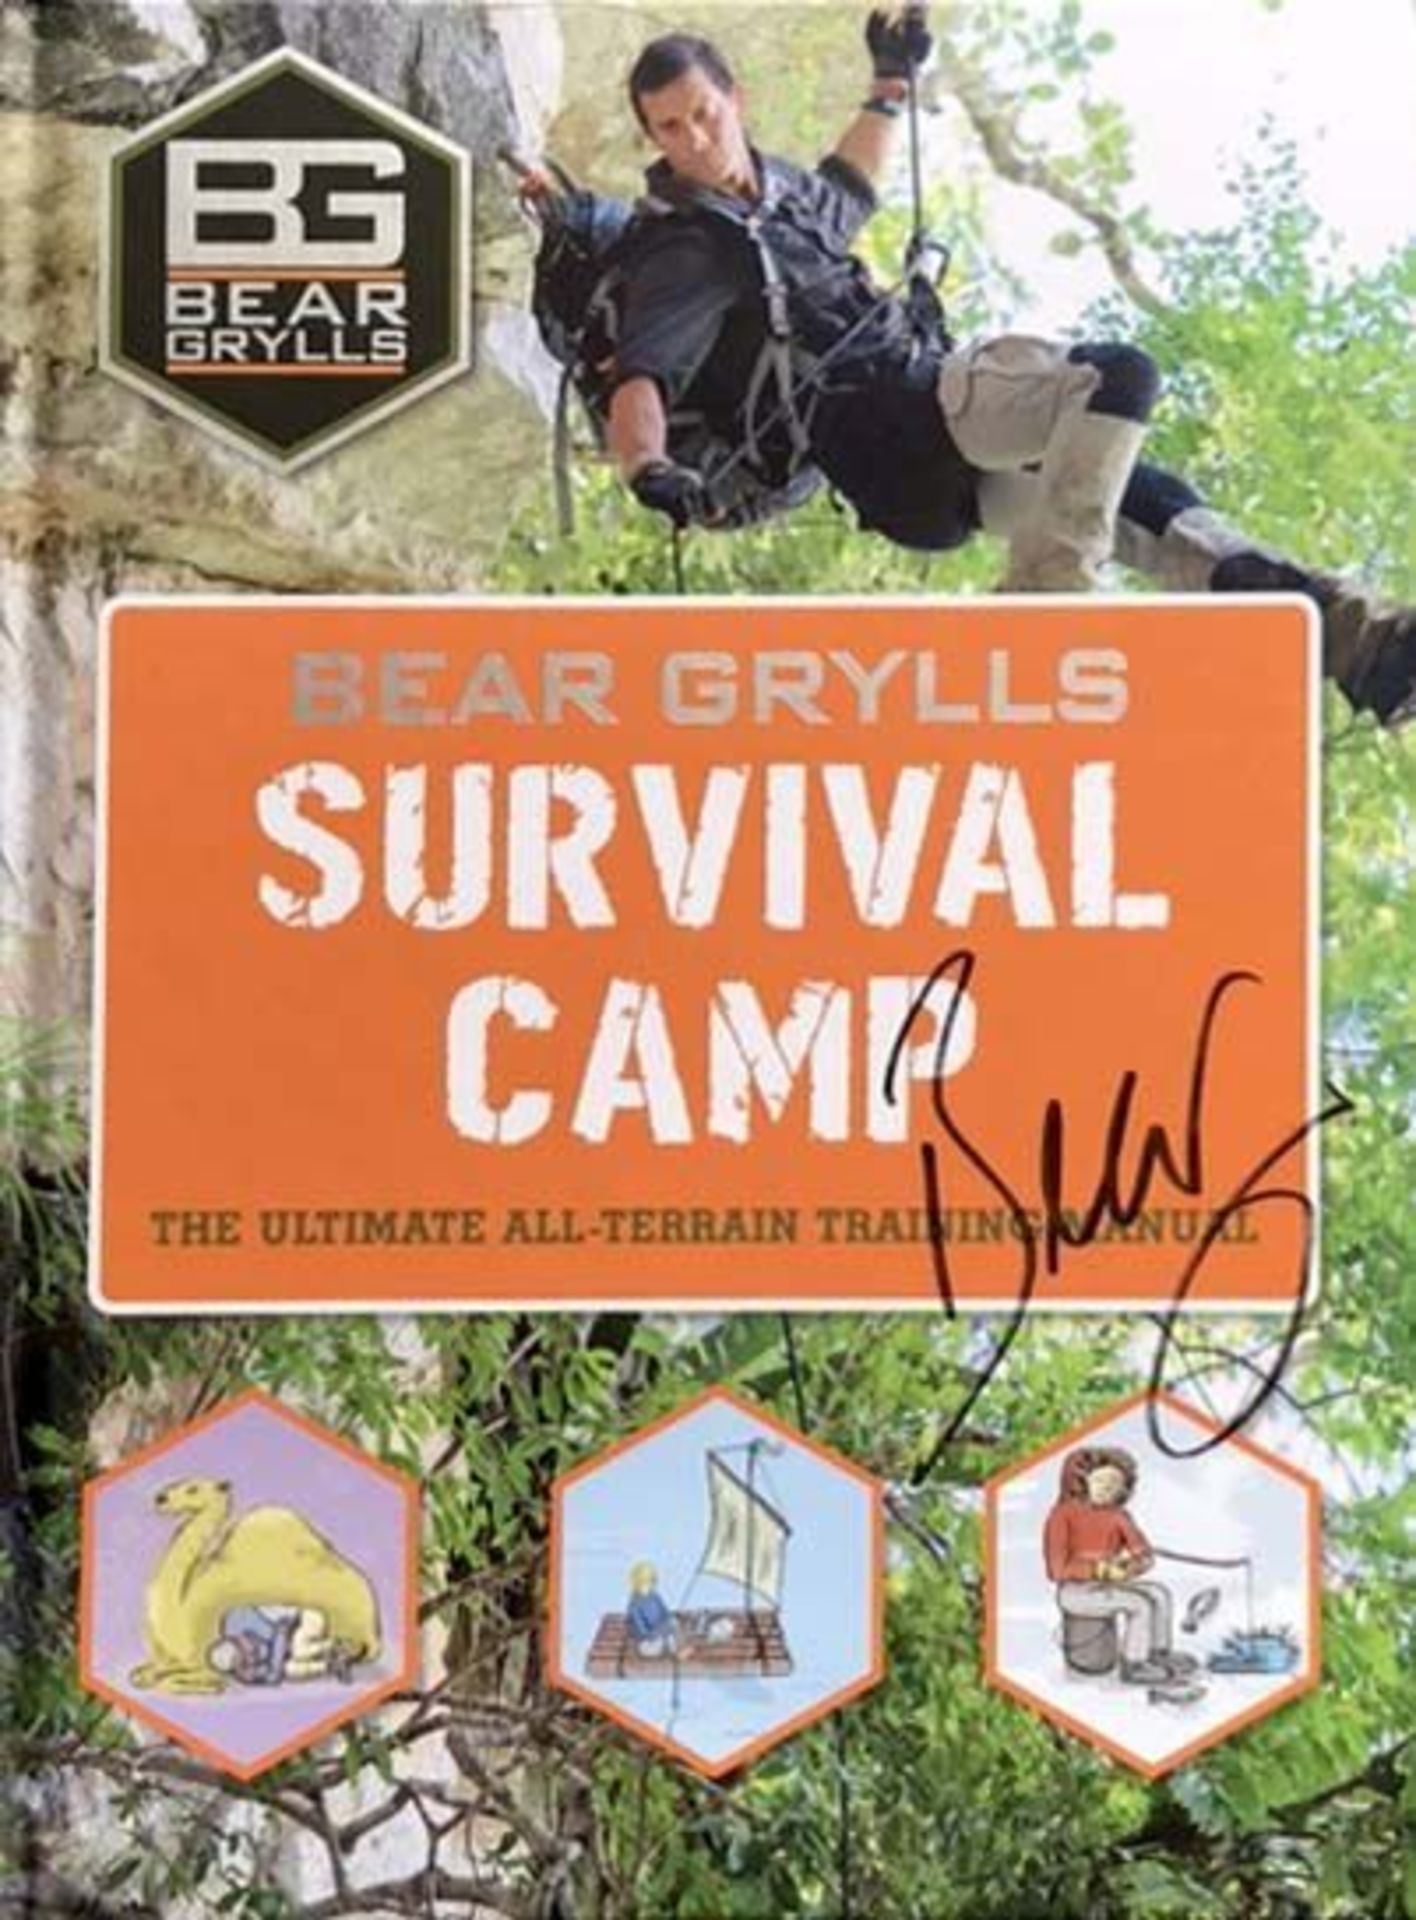 Hardback copy of 'Survival Camp - The Ultimate All-Terrain Training Manual'. Signed by the author